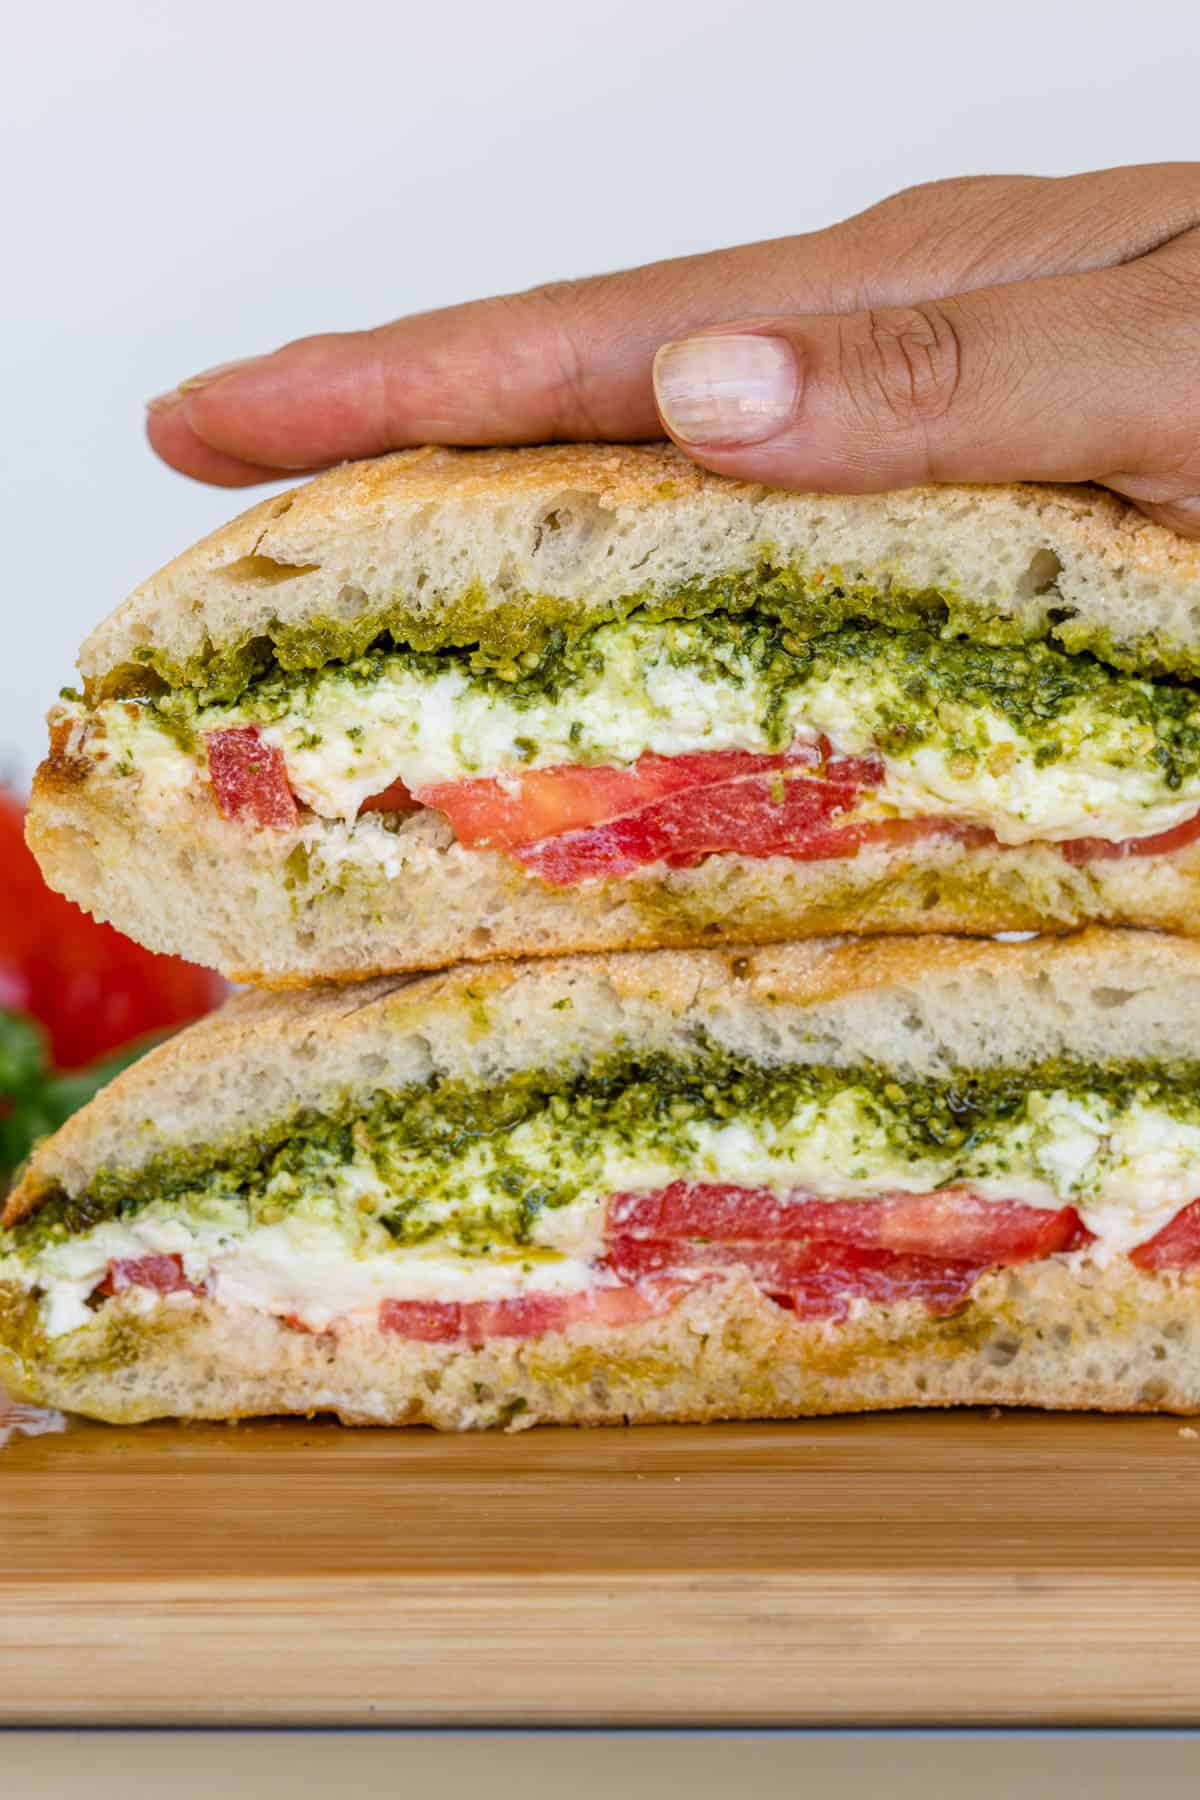 Burrata Caprese Sandwich stacked with hand on top